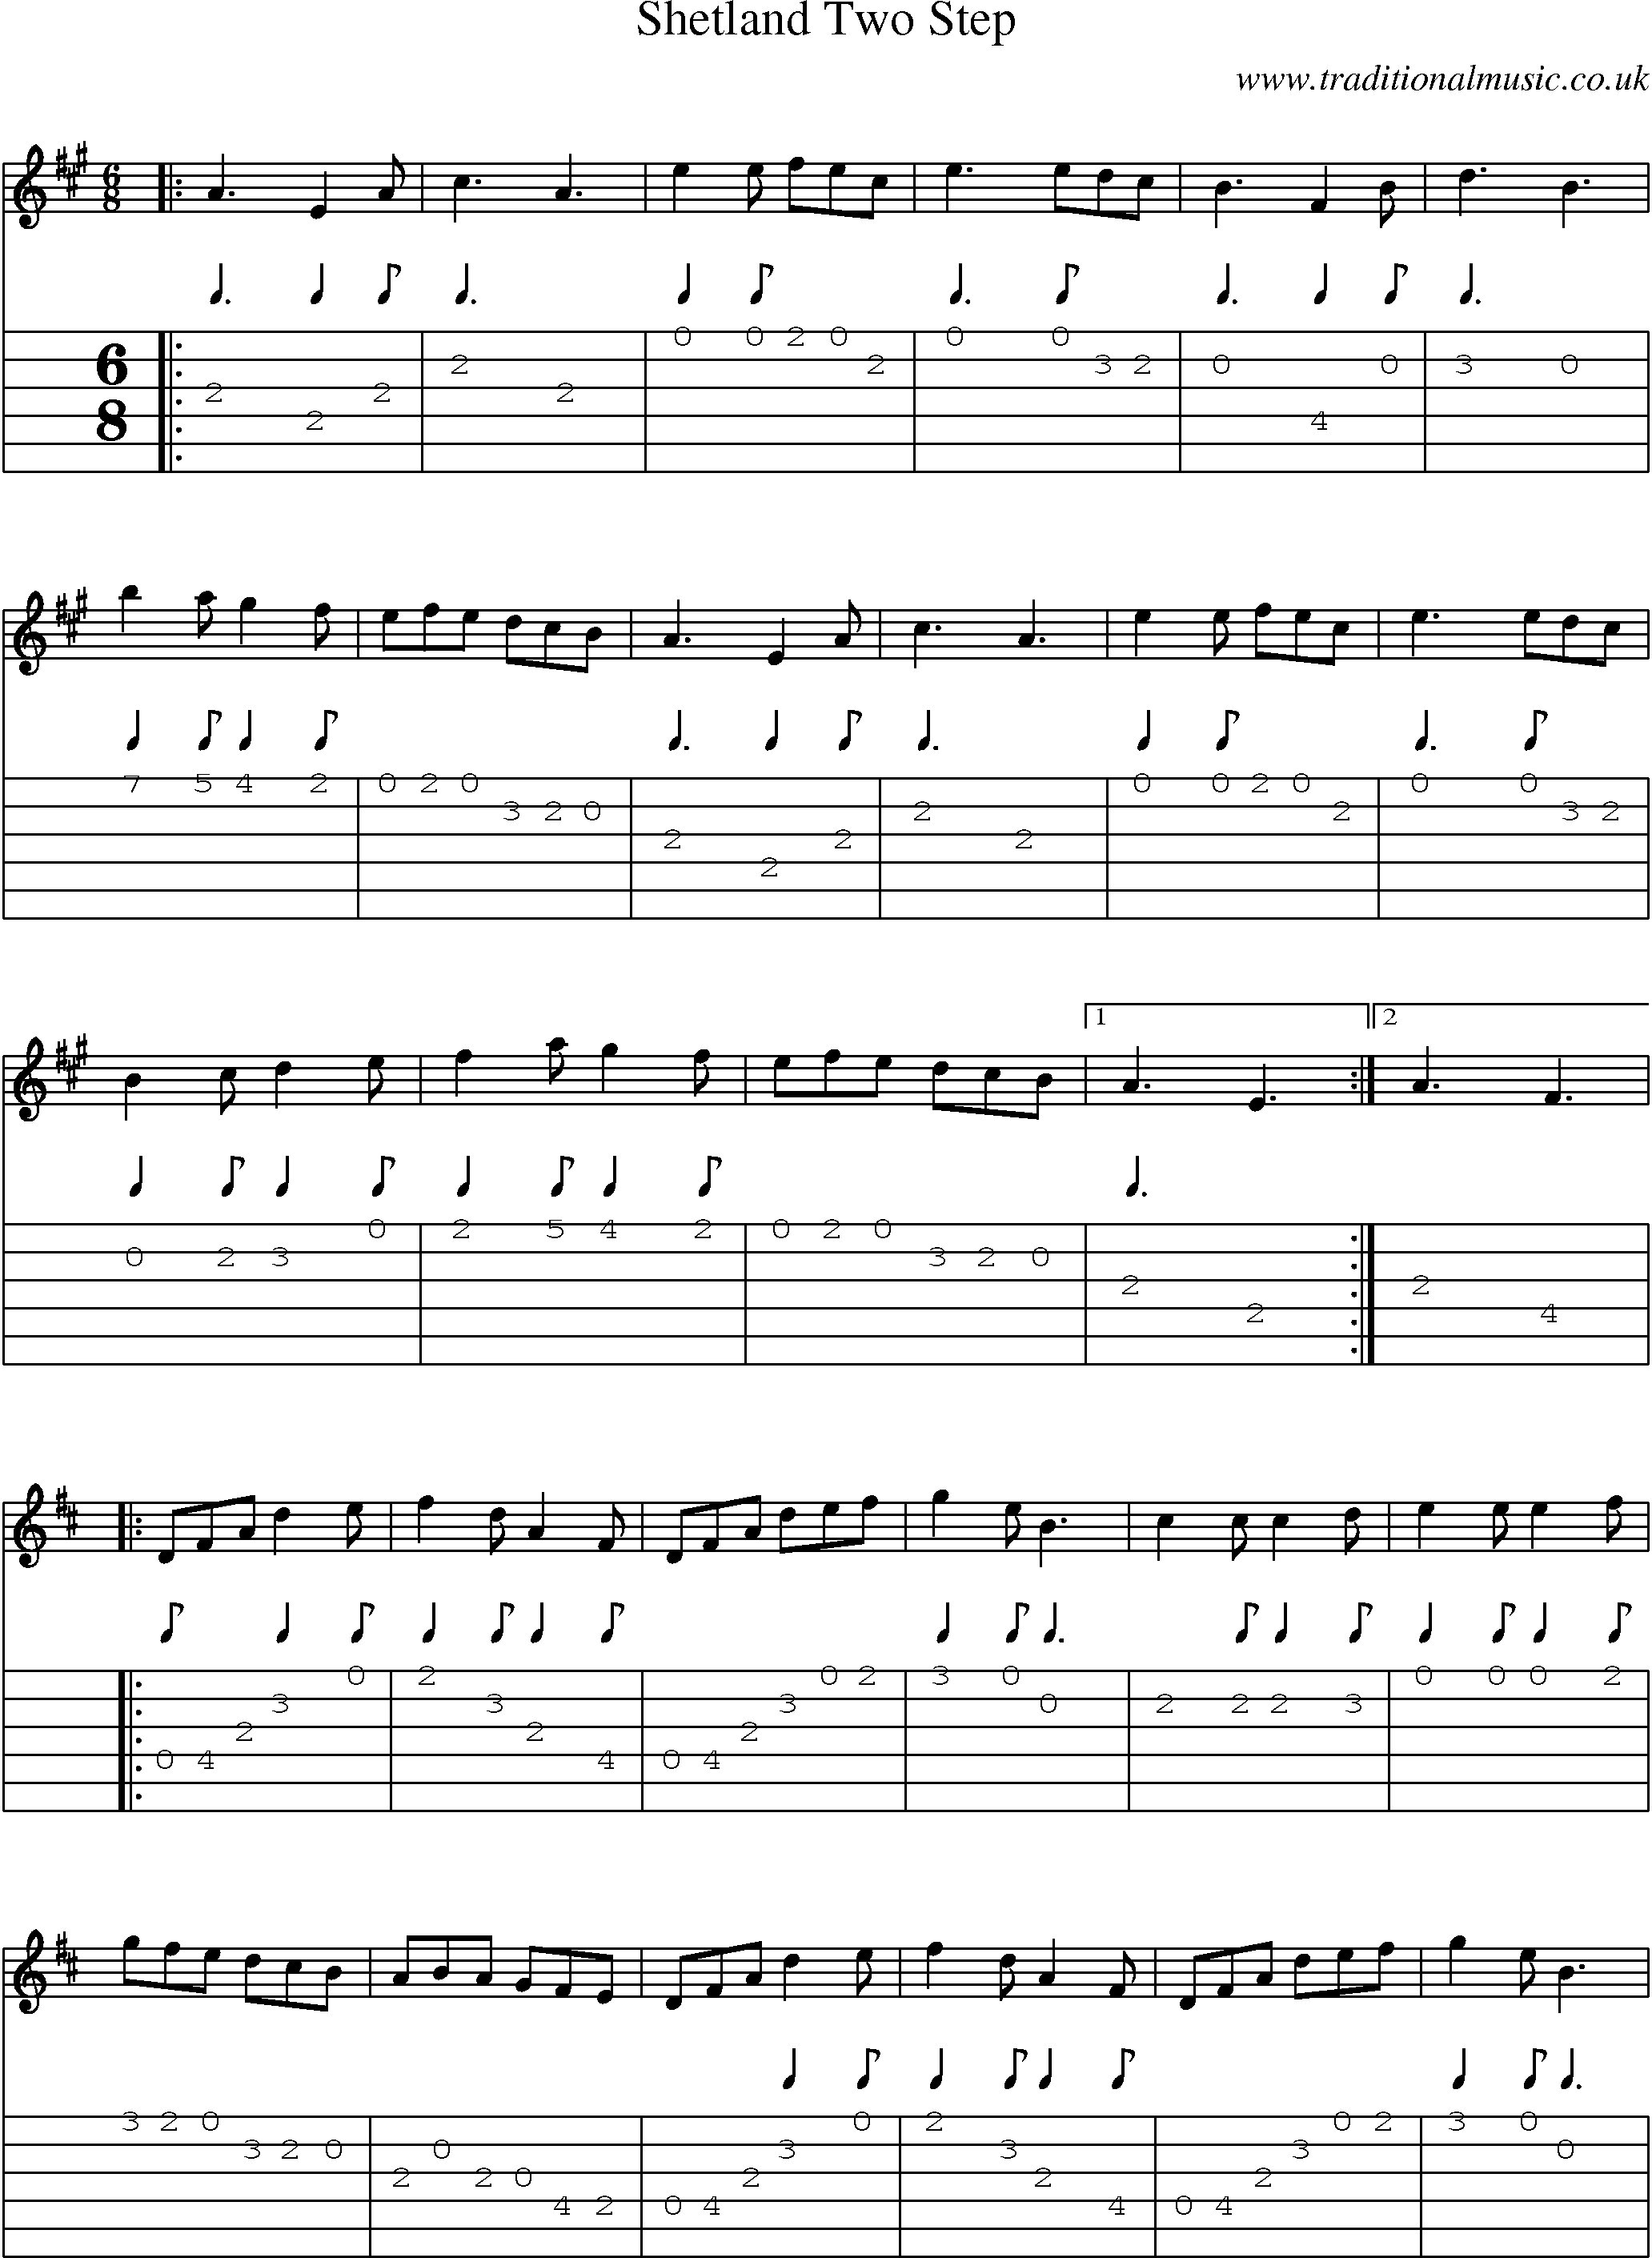 Music Score and Guitar Tabs for Shetland Two Step